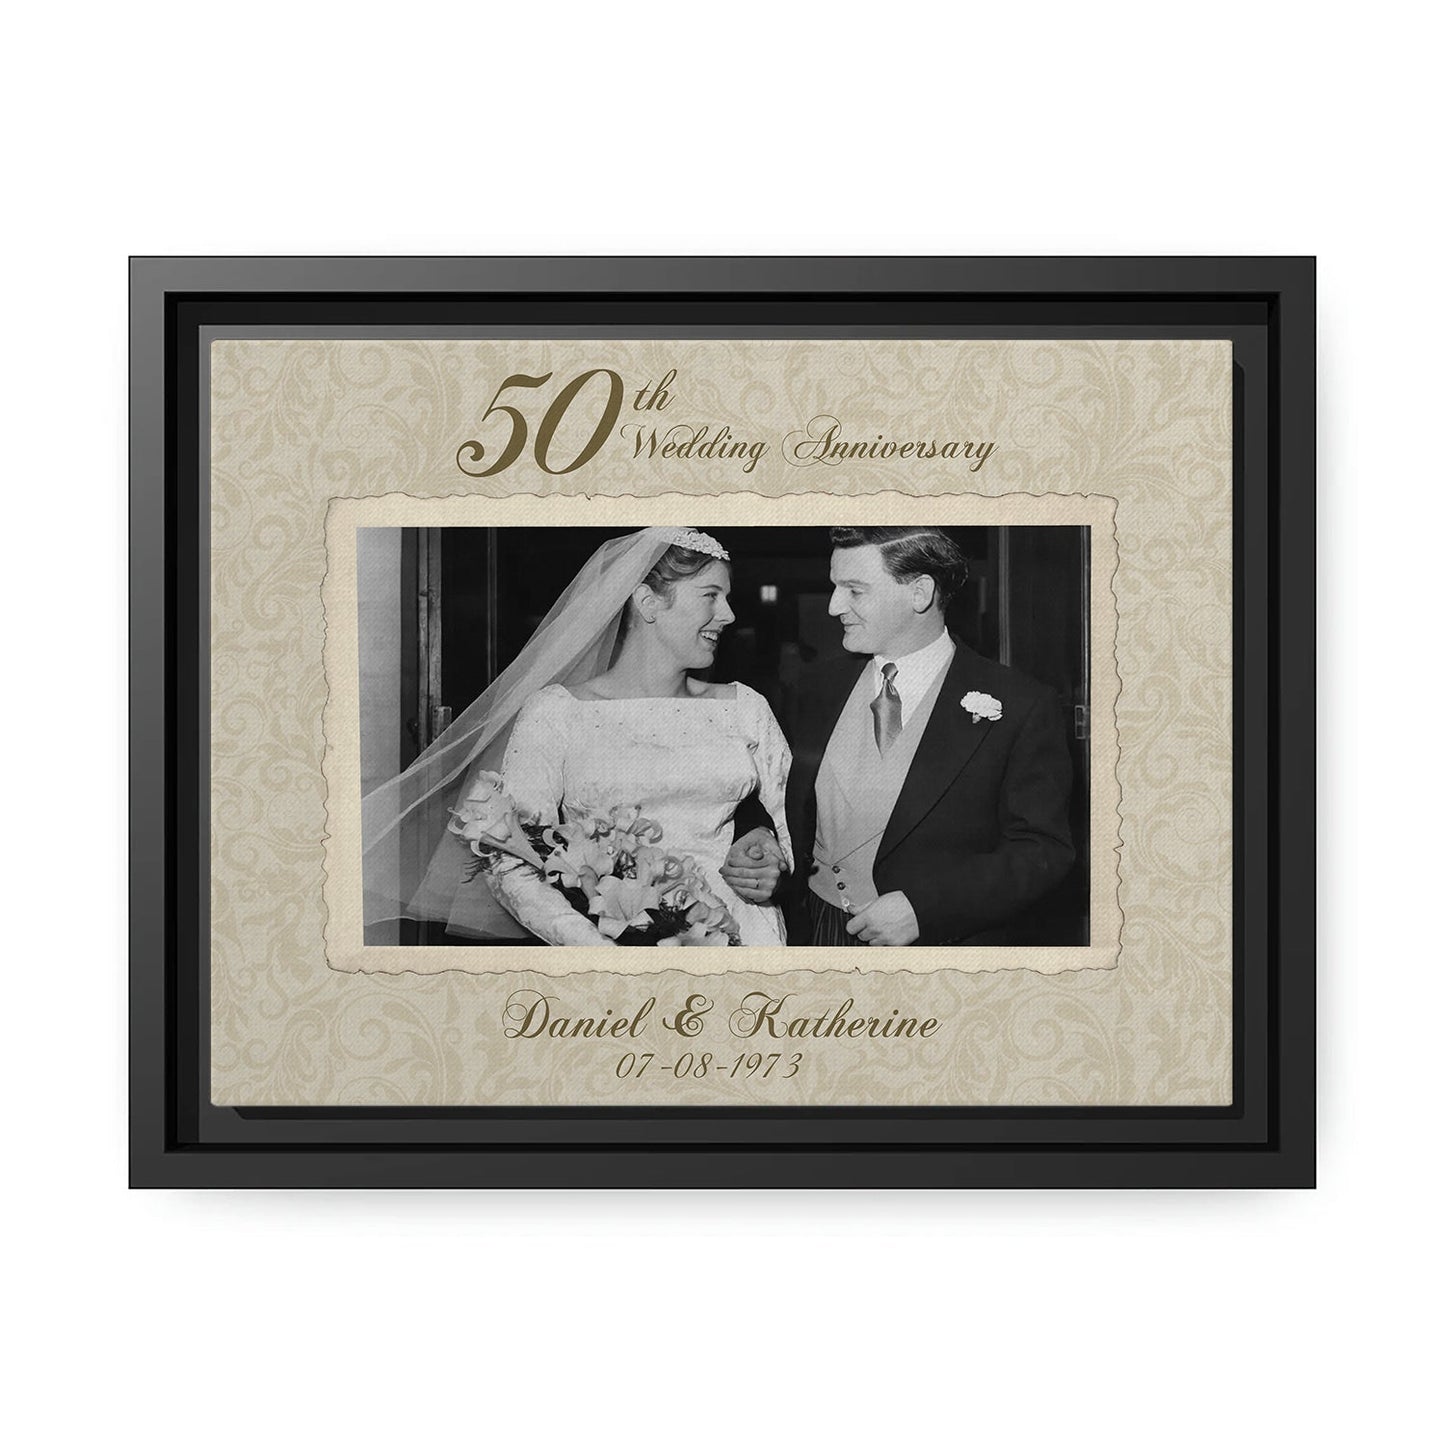 50th Wedding Anniversary - Personalized 50 Year Wedding Anniversary gift for Parents - Custom Canvas - MyMindfulGifts